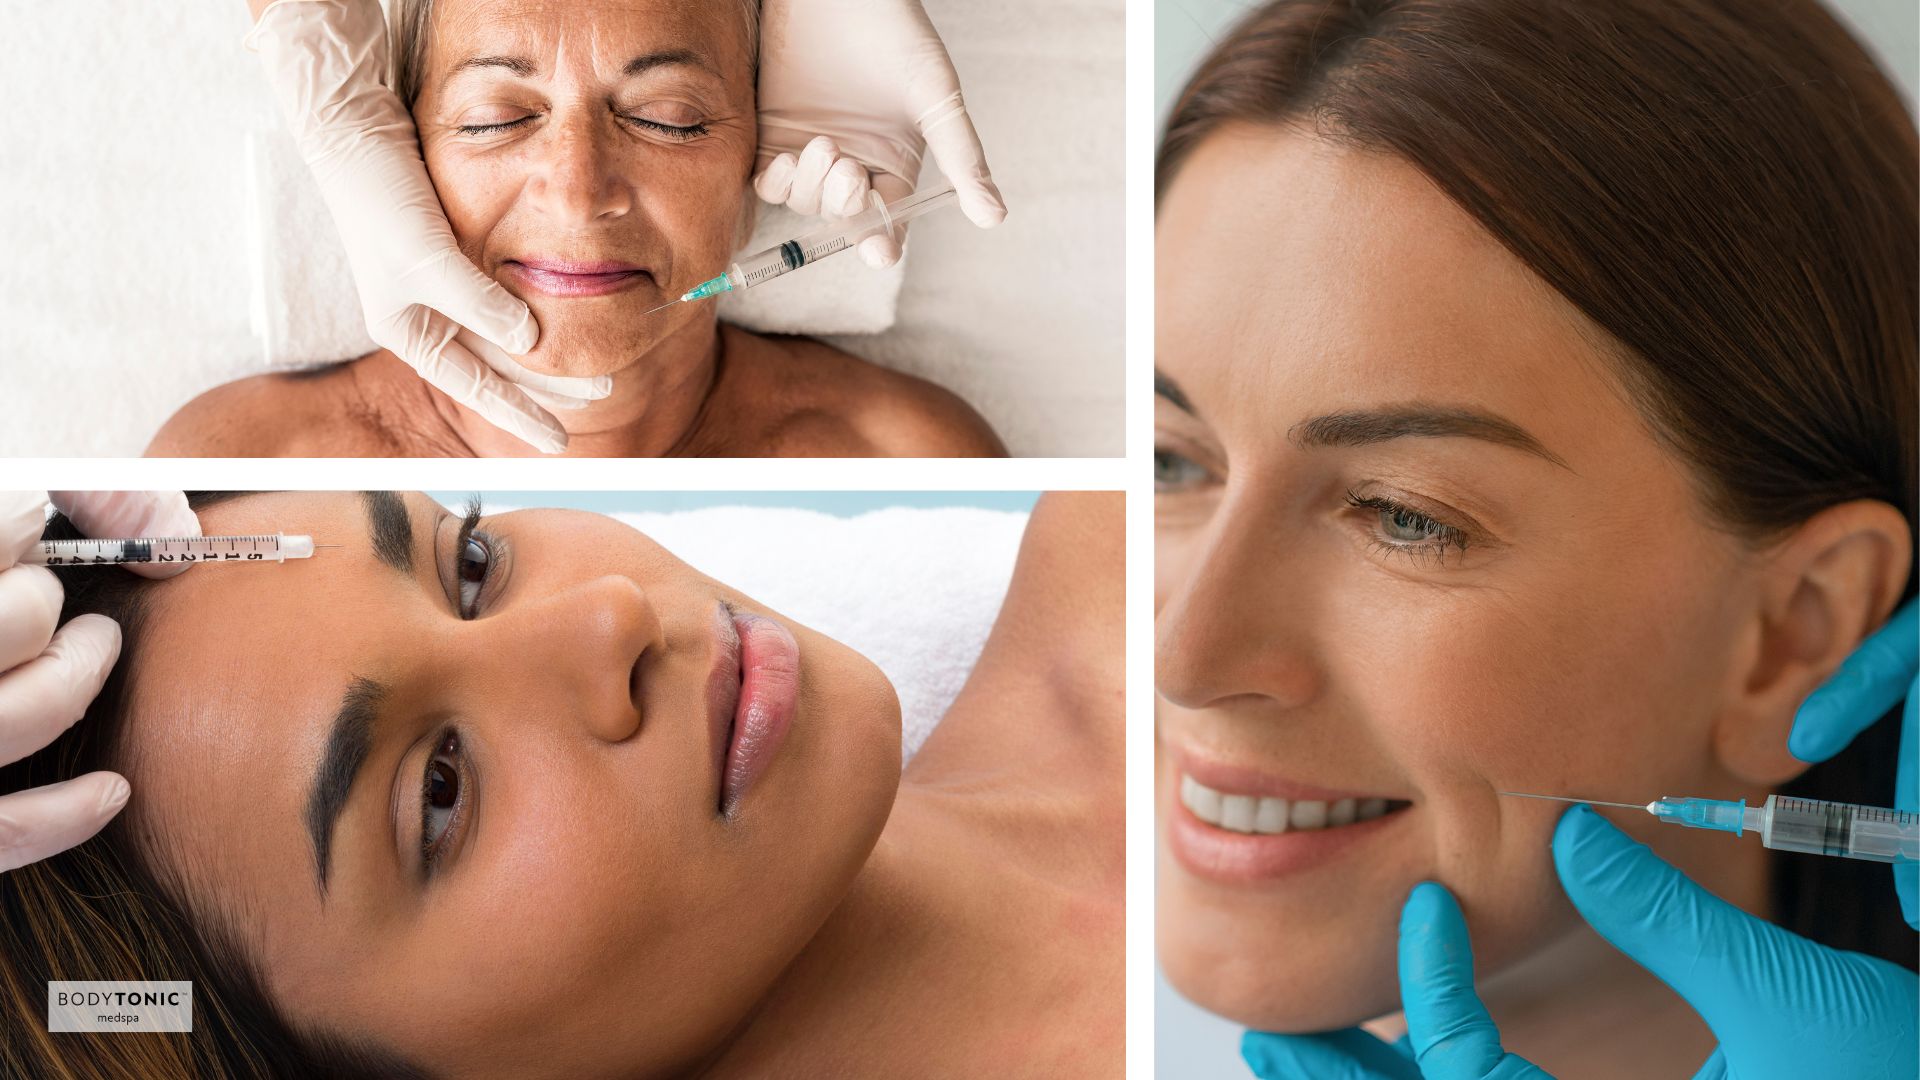 The top Benefits of botox in women of different age ranges